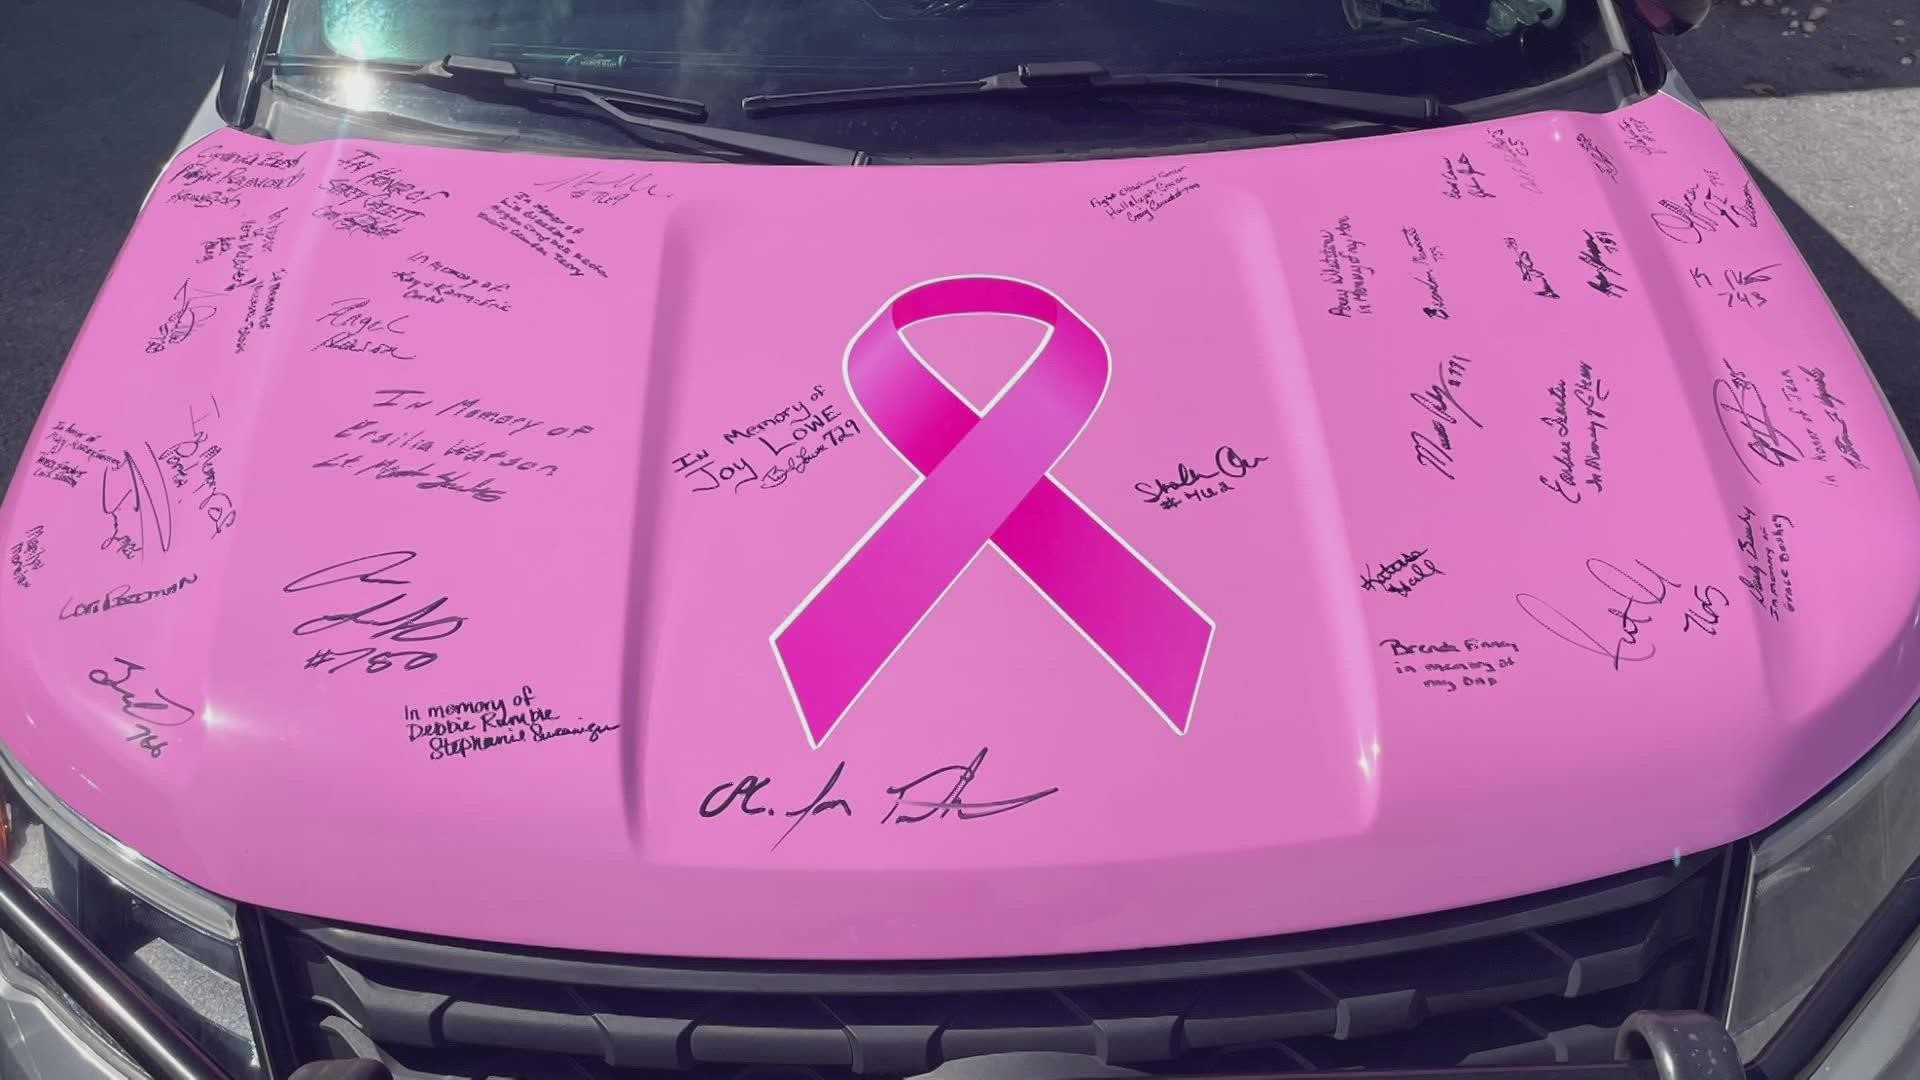 Oct. 1 kicks off Breast Cancer Awareness Month and the Pigeon Forge Police Department showed off their support a day early with a pink cruiser!